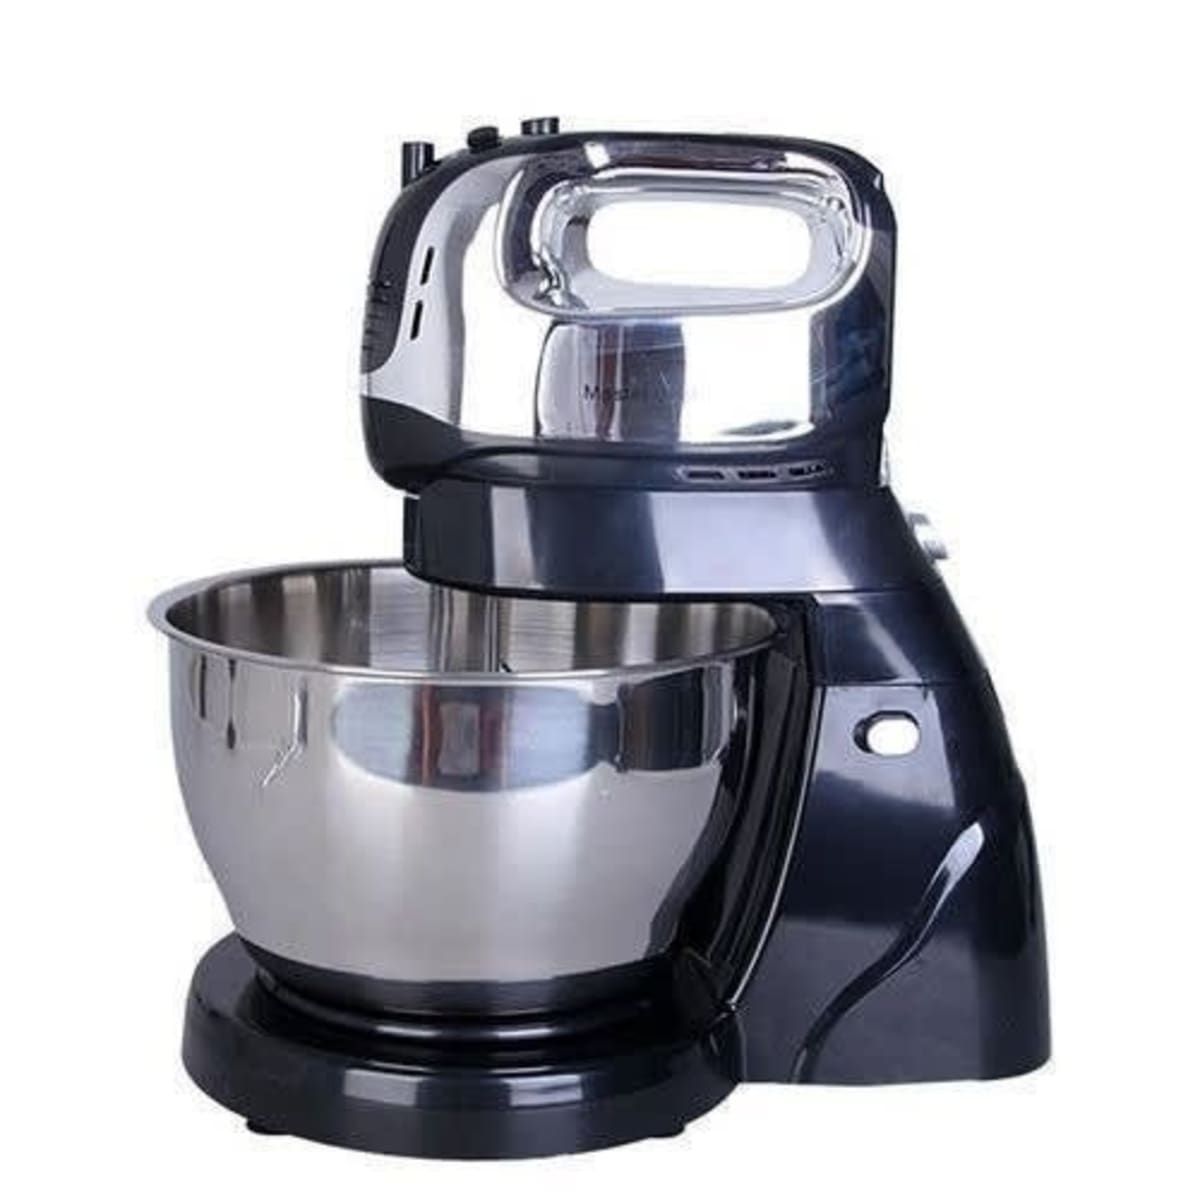 Chef 4l Stand Cake Mixer With Rotating Bowl | Konga Online Shopping